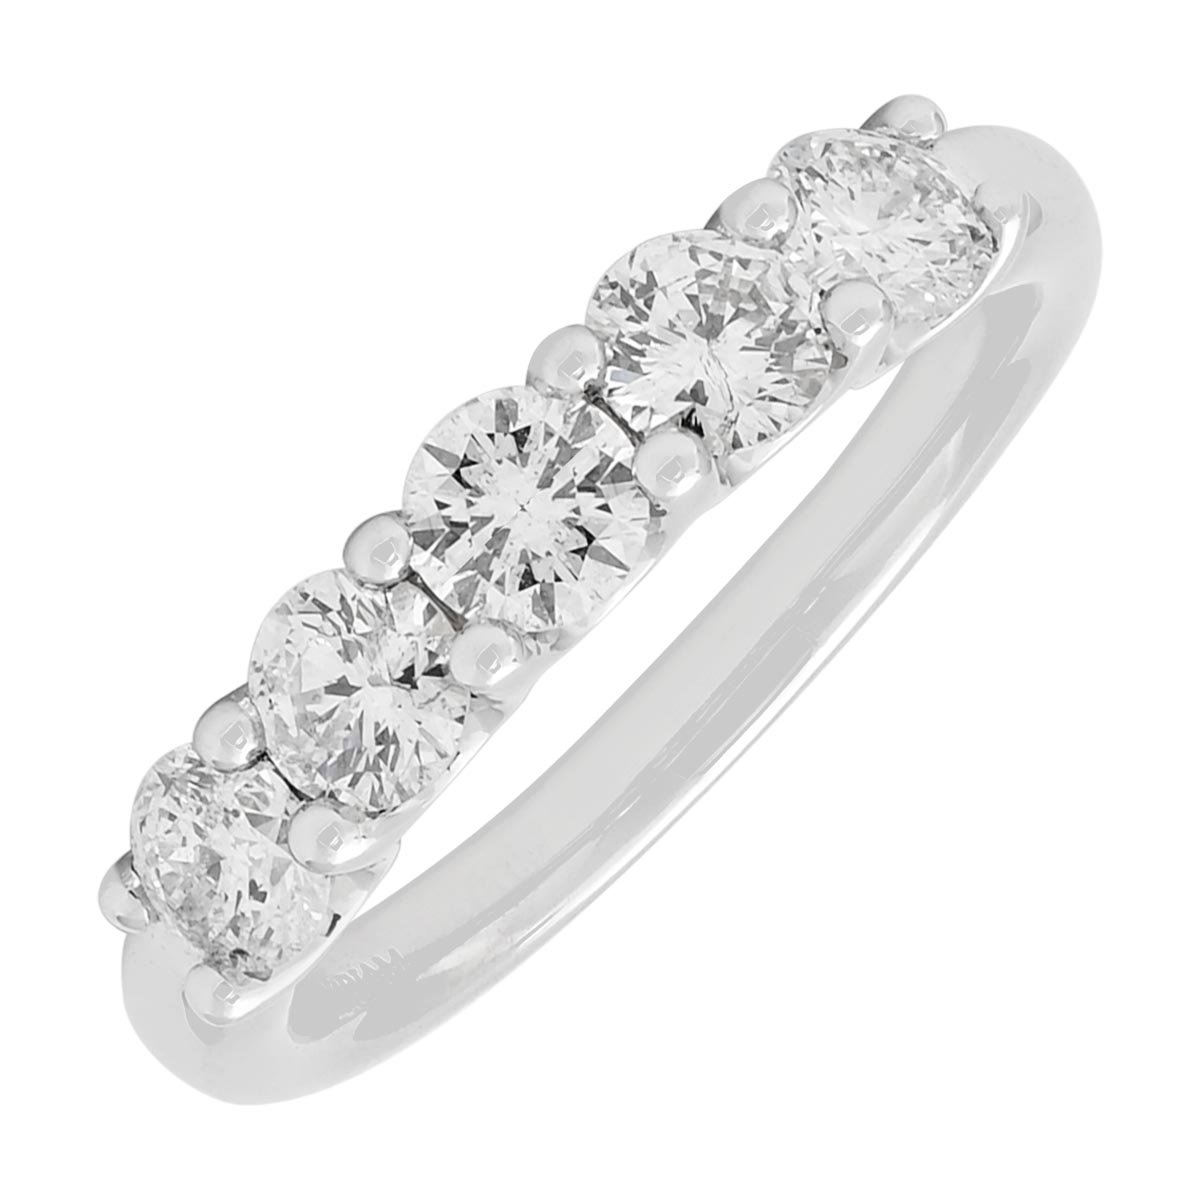 Northern Star Five Diamond Band in 14kt White Gold (1ct tw)